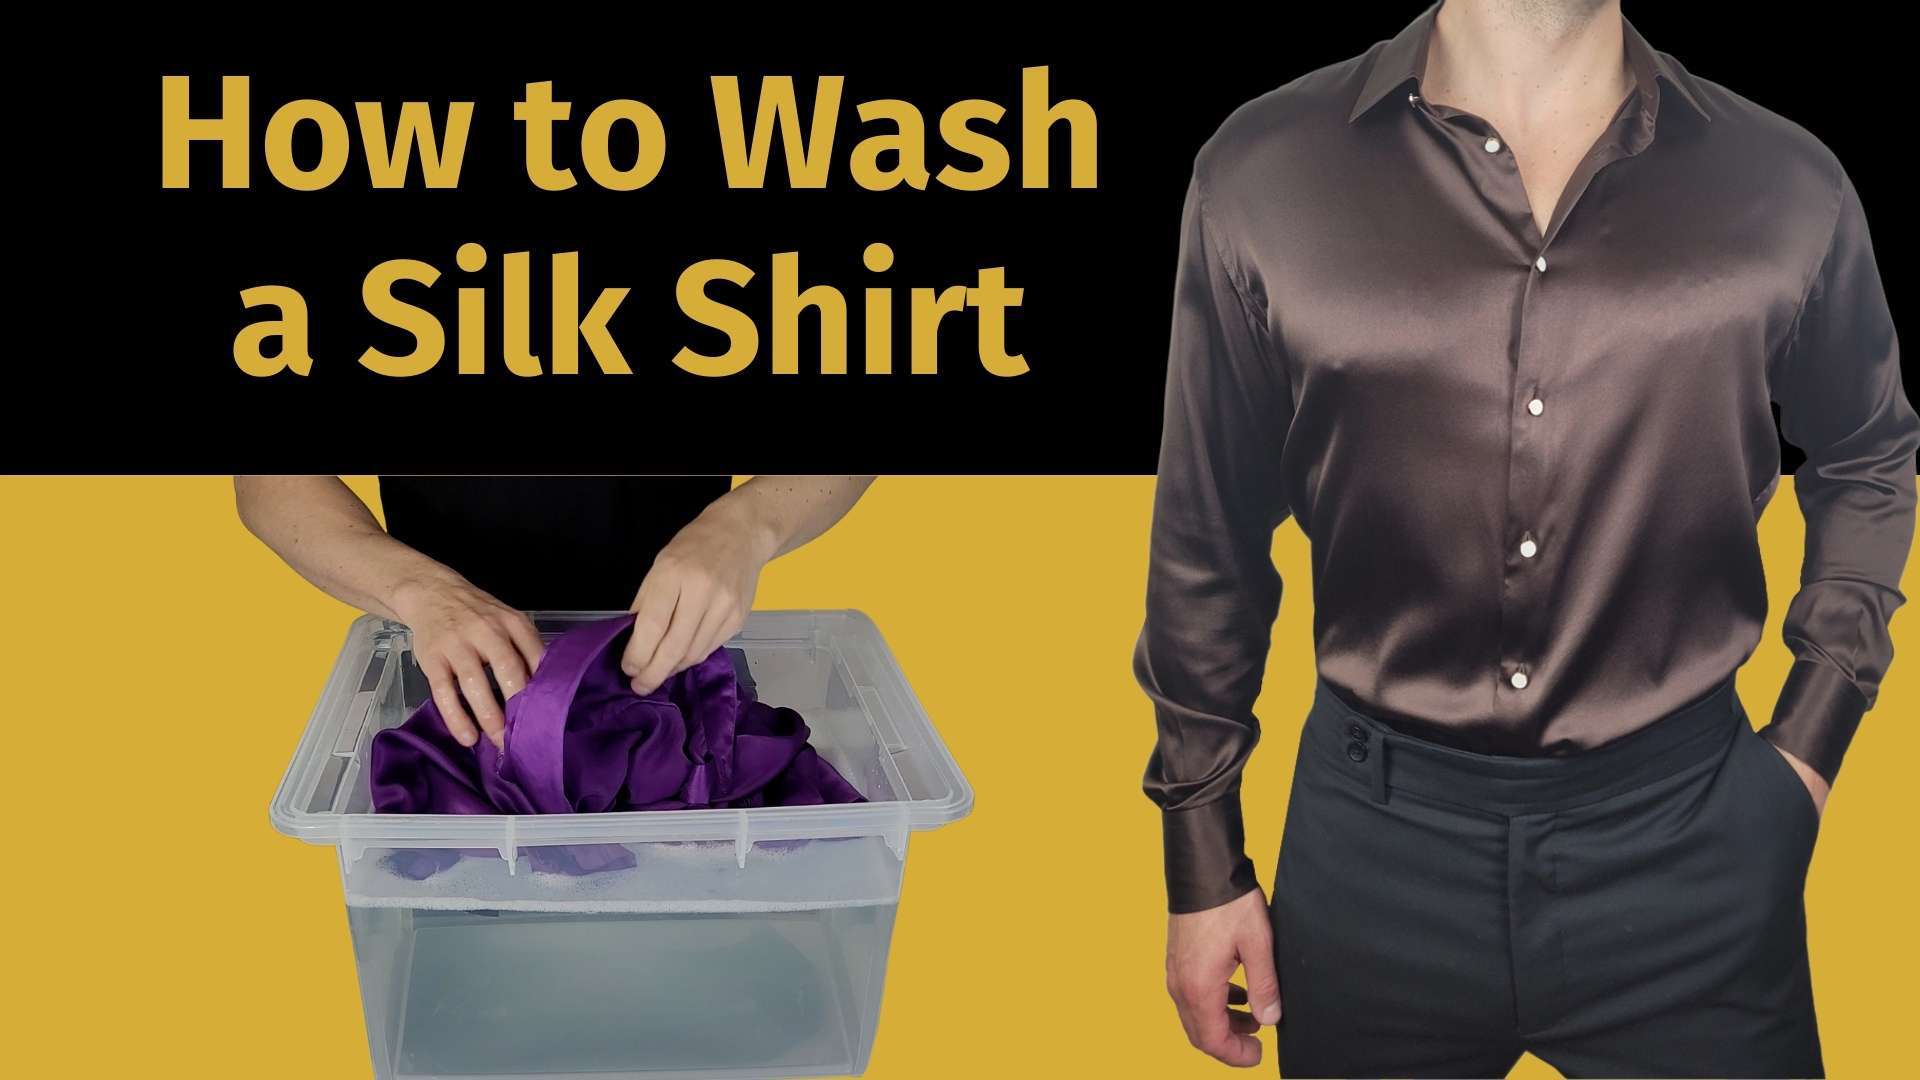 how to wash a silk shirt banner image with a picture of a man hand washing a purple silk shirt in a tub of soapy water